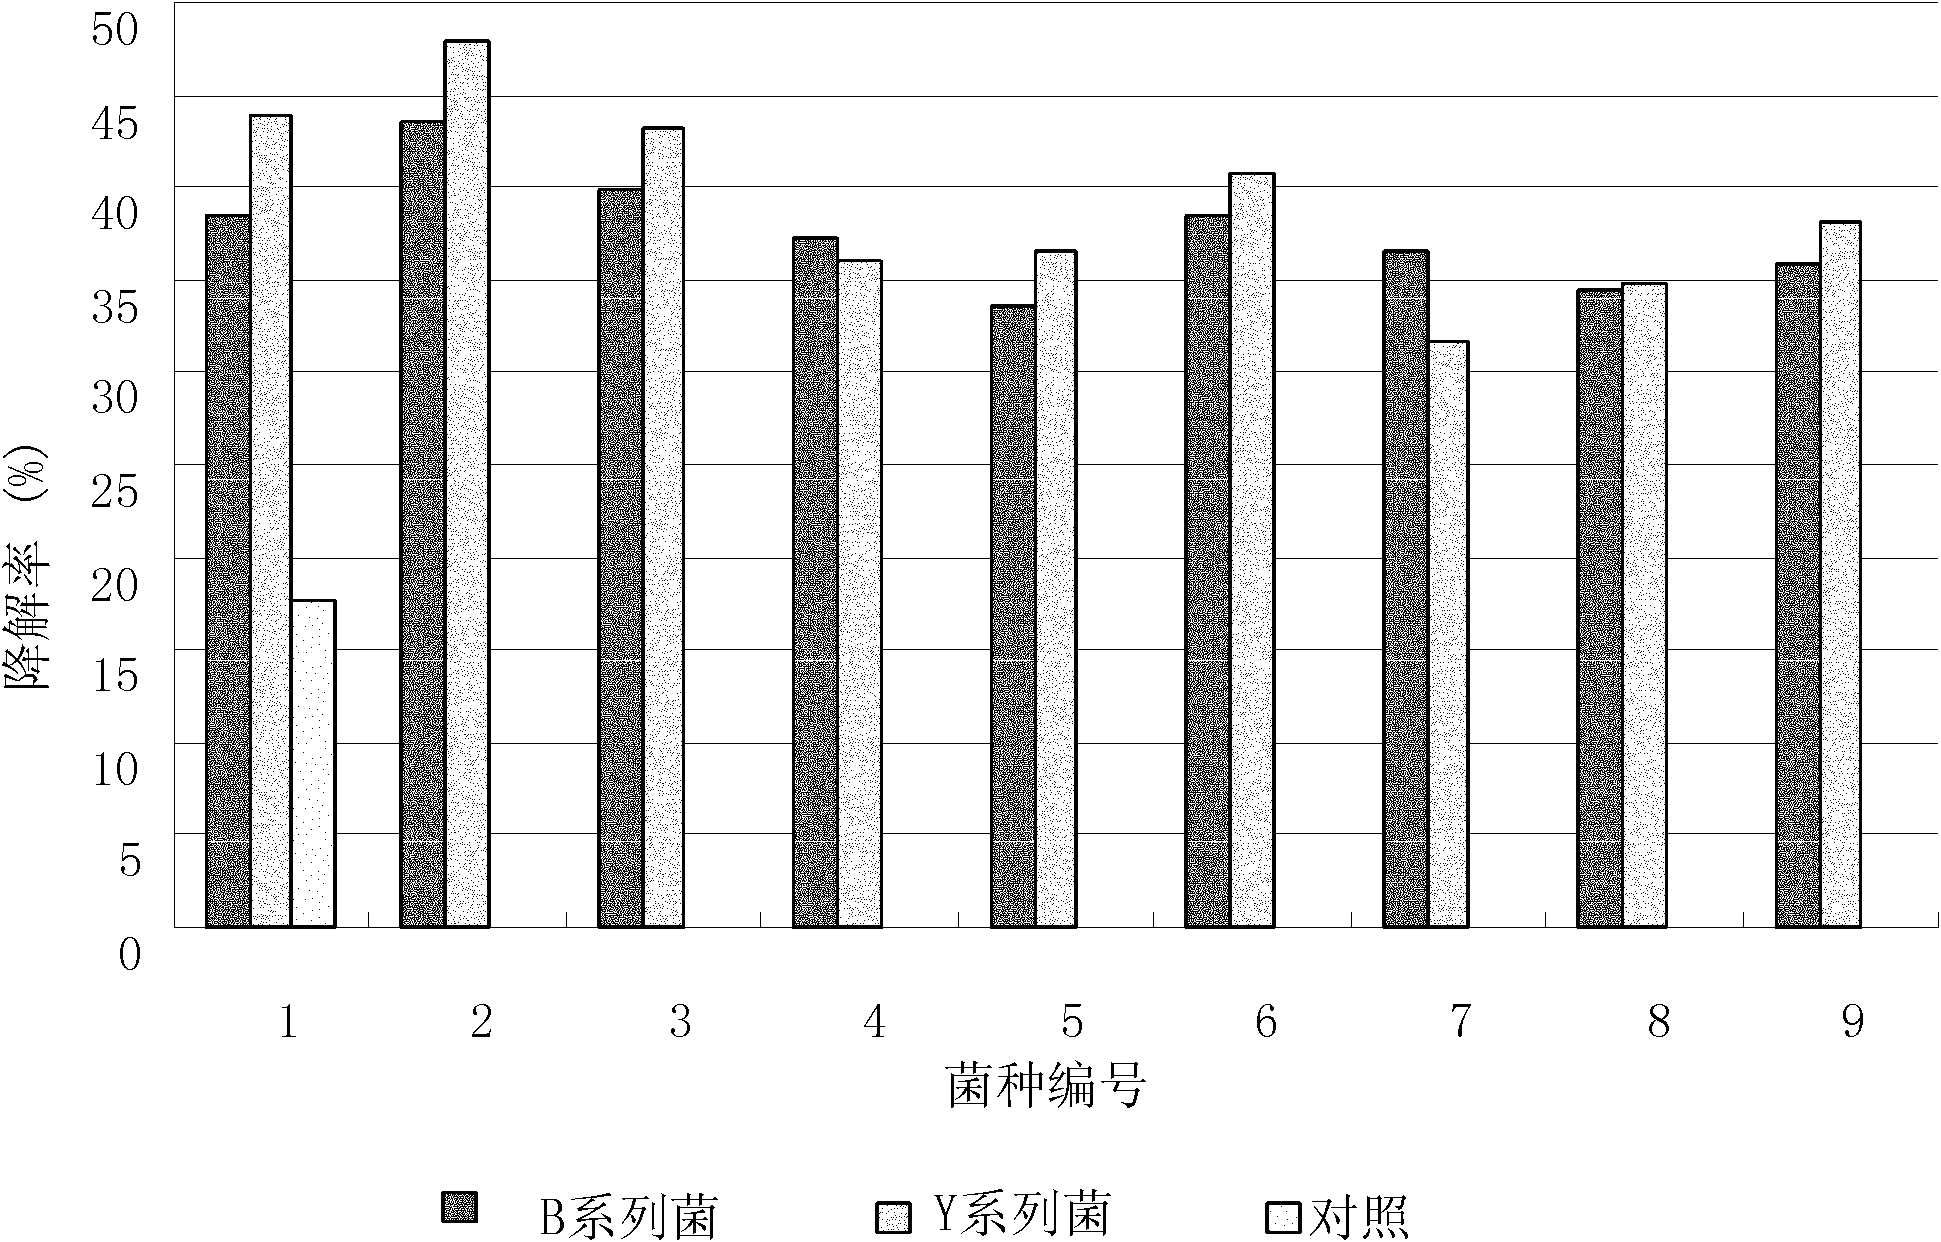 Method for screening and remediation of petroleum-contaminated soil bioremediation agent